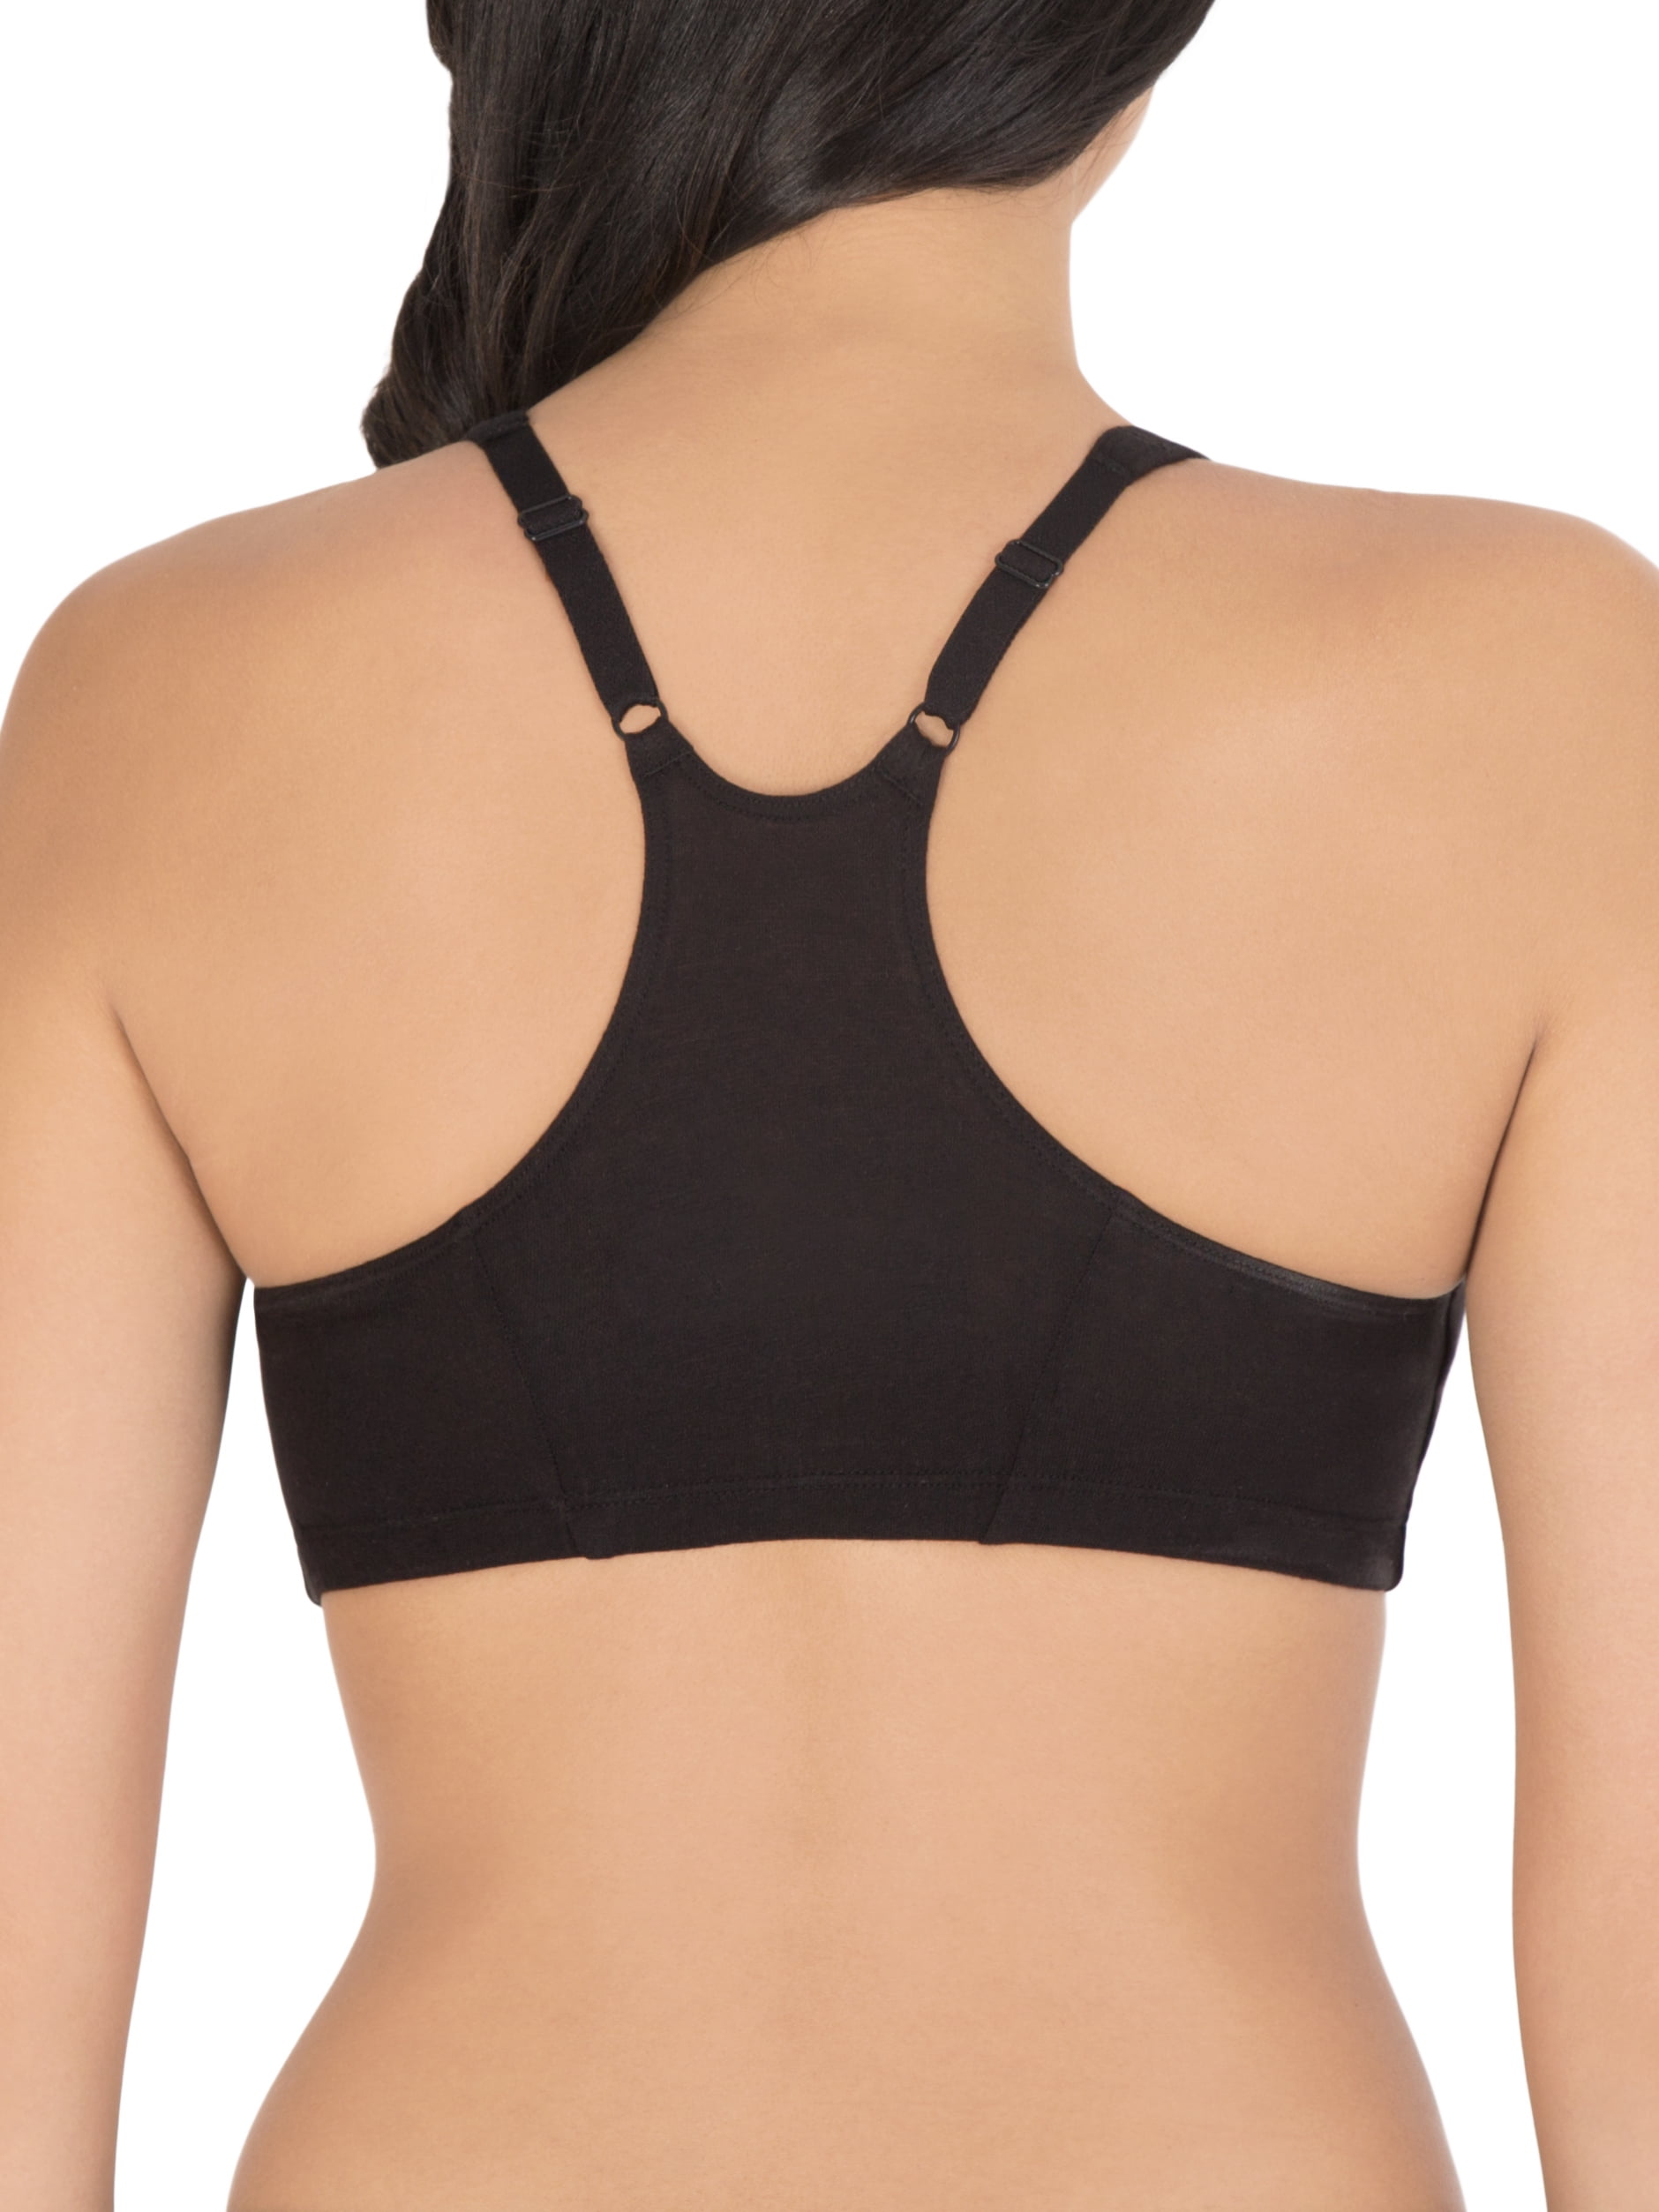 Fruit of the Loom Women's Shirred Front Racerback Sports Bra, Style-90011,  3-Pack 